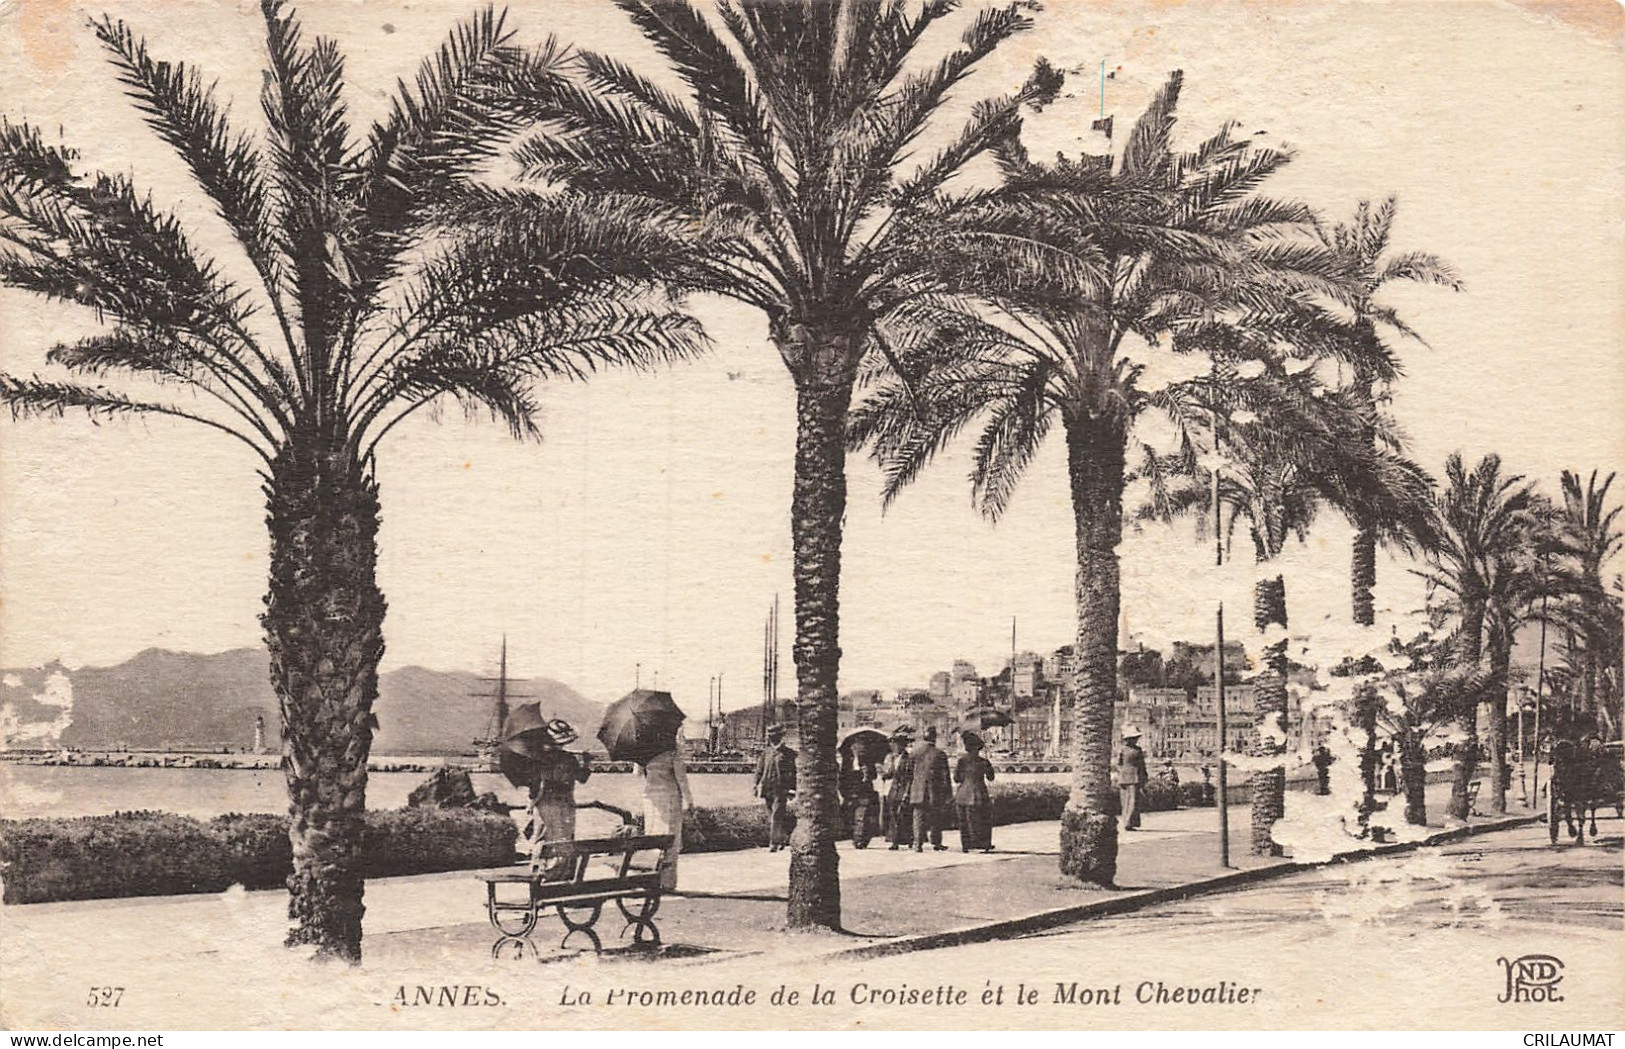 06-CANNES-N°T5313-B/0299 - Cannes